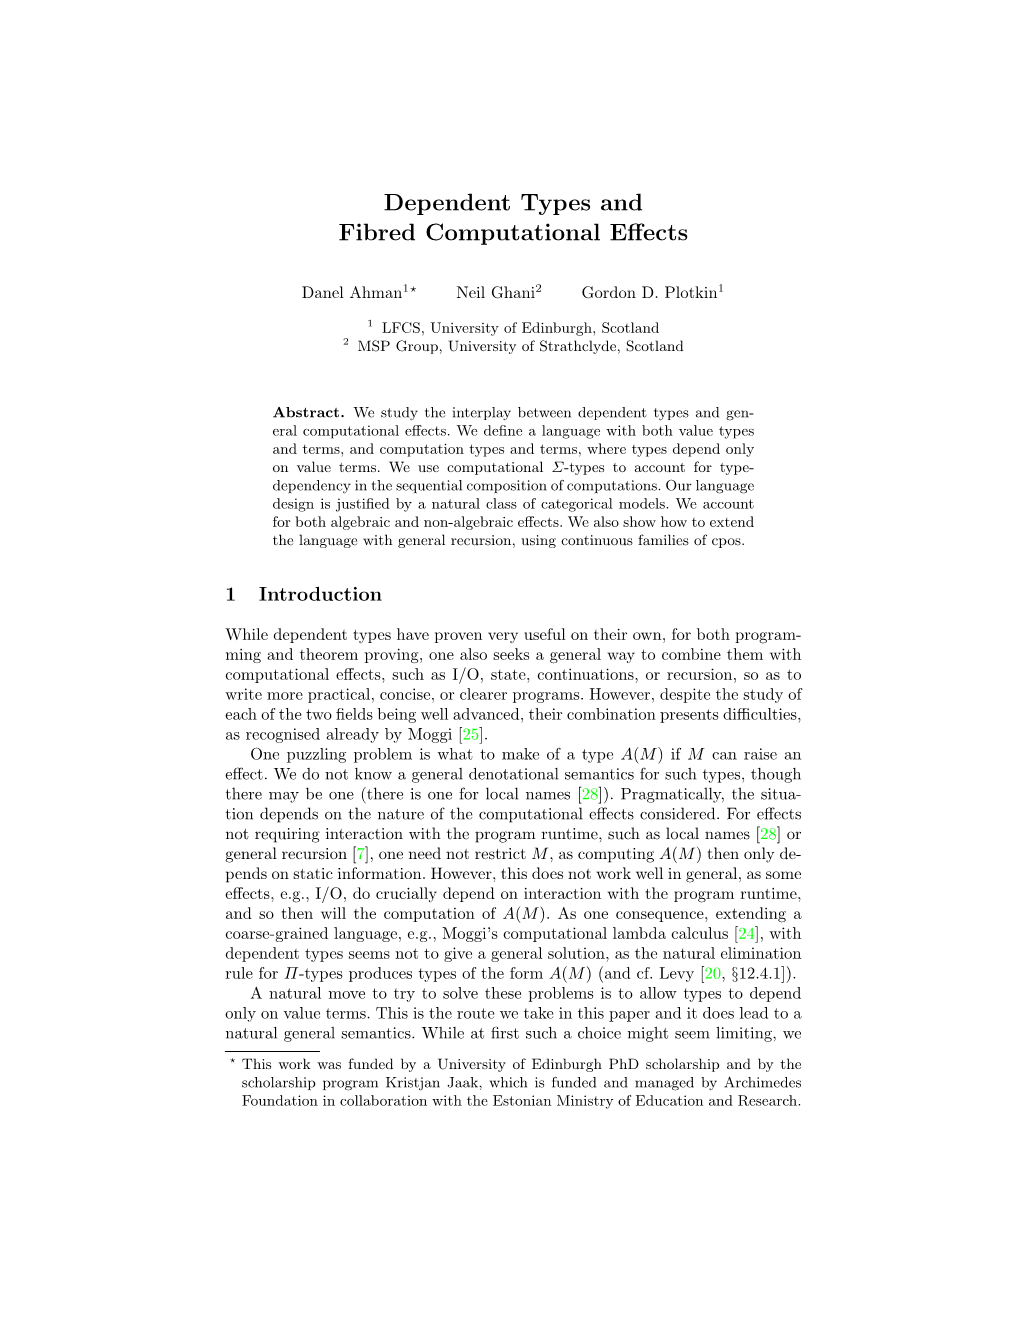 Dependent Types and Fibred Computational Effects